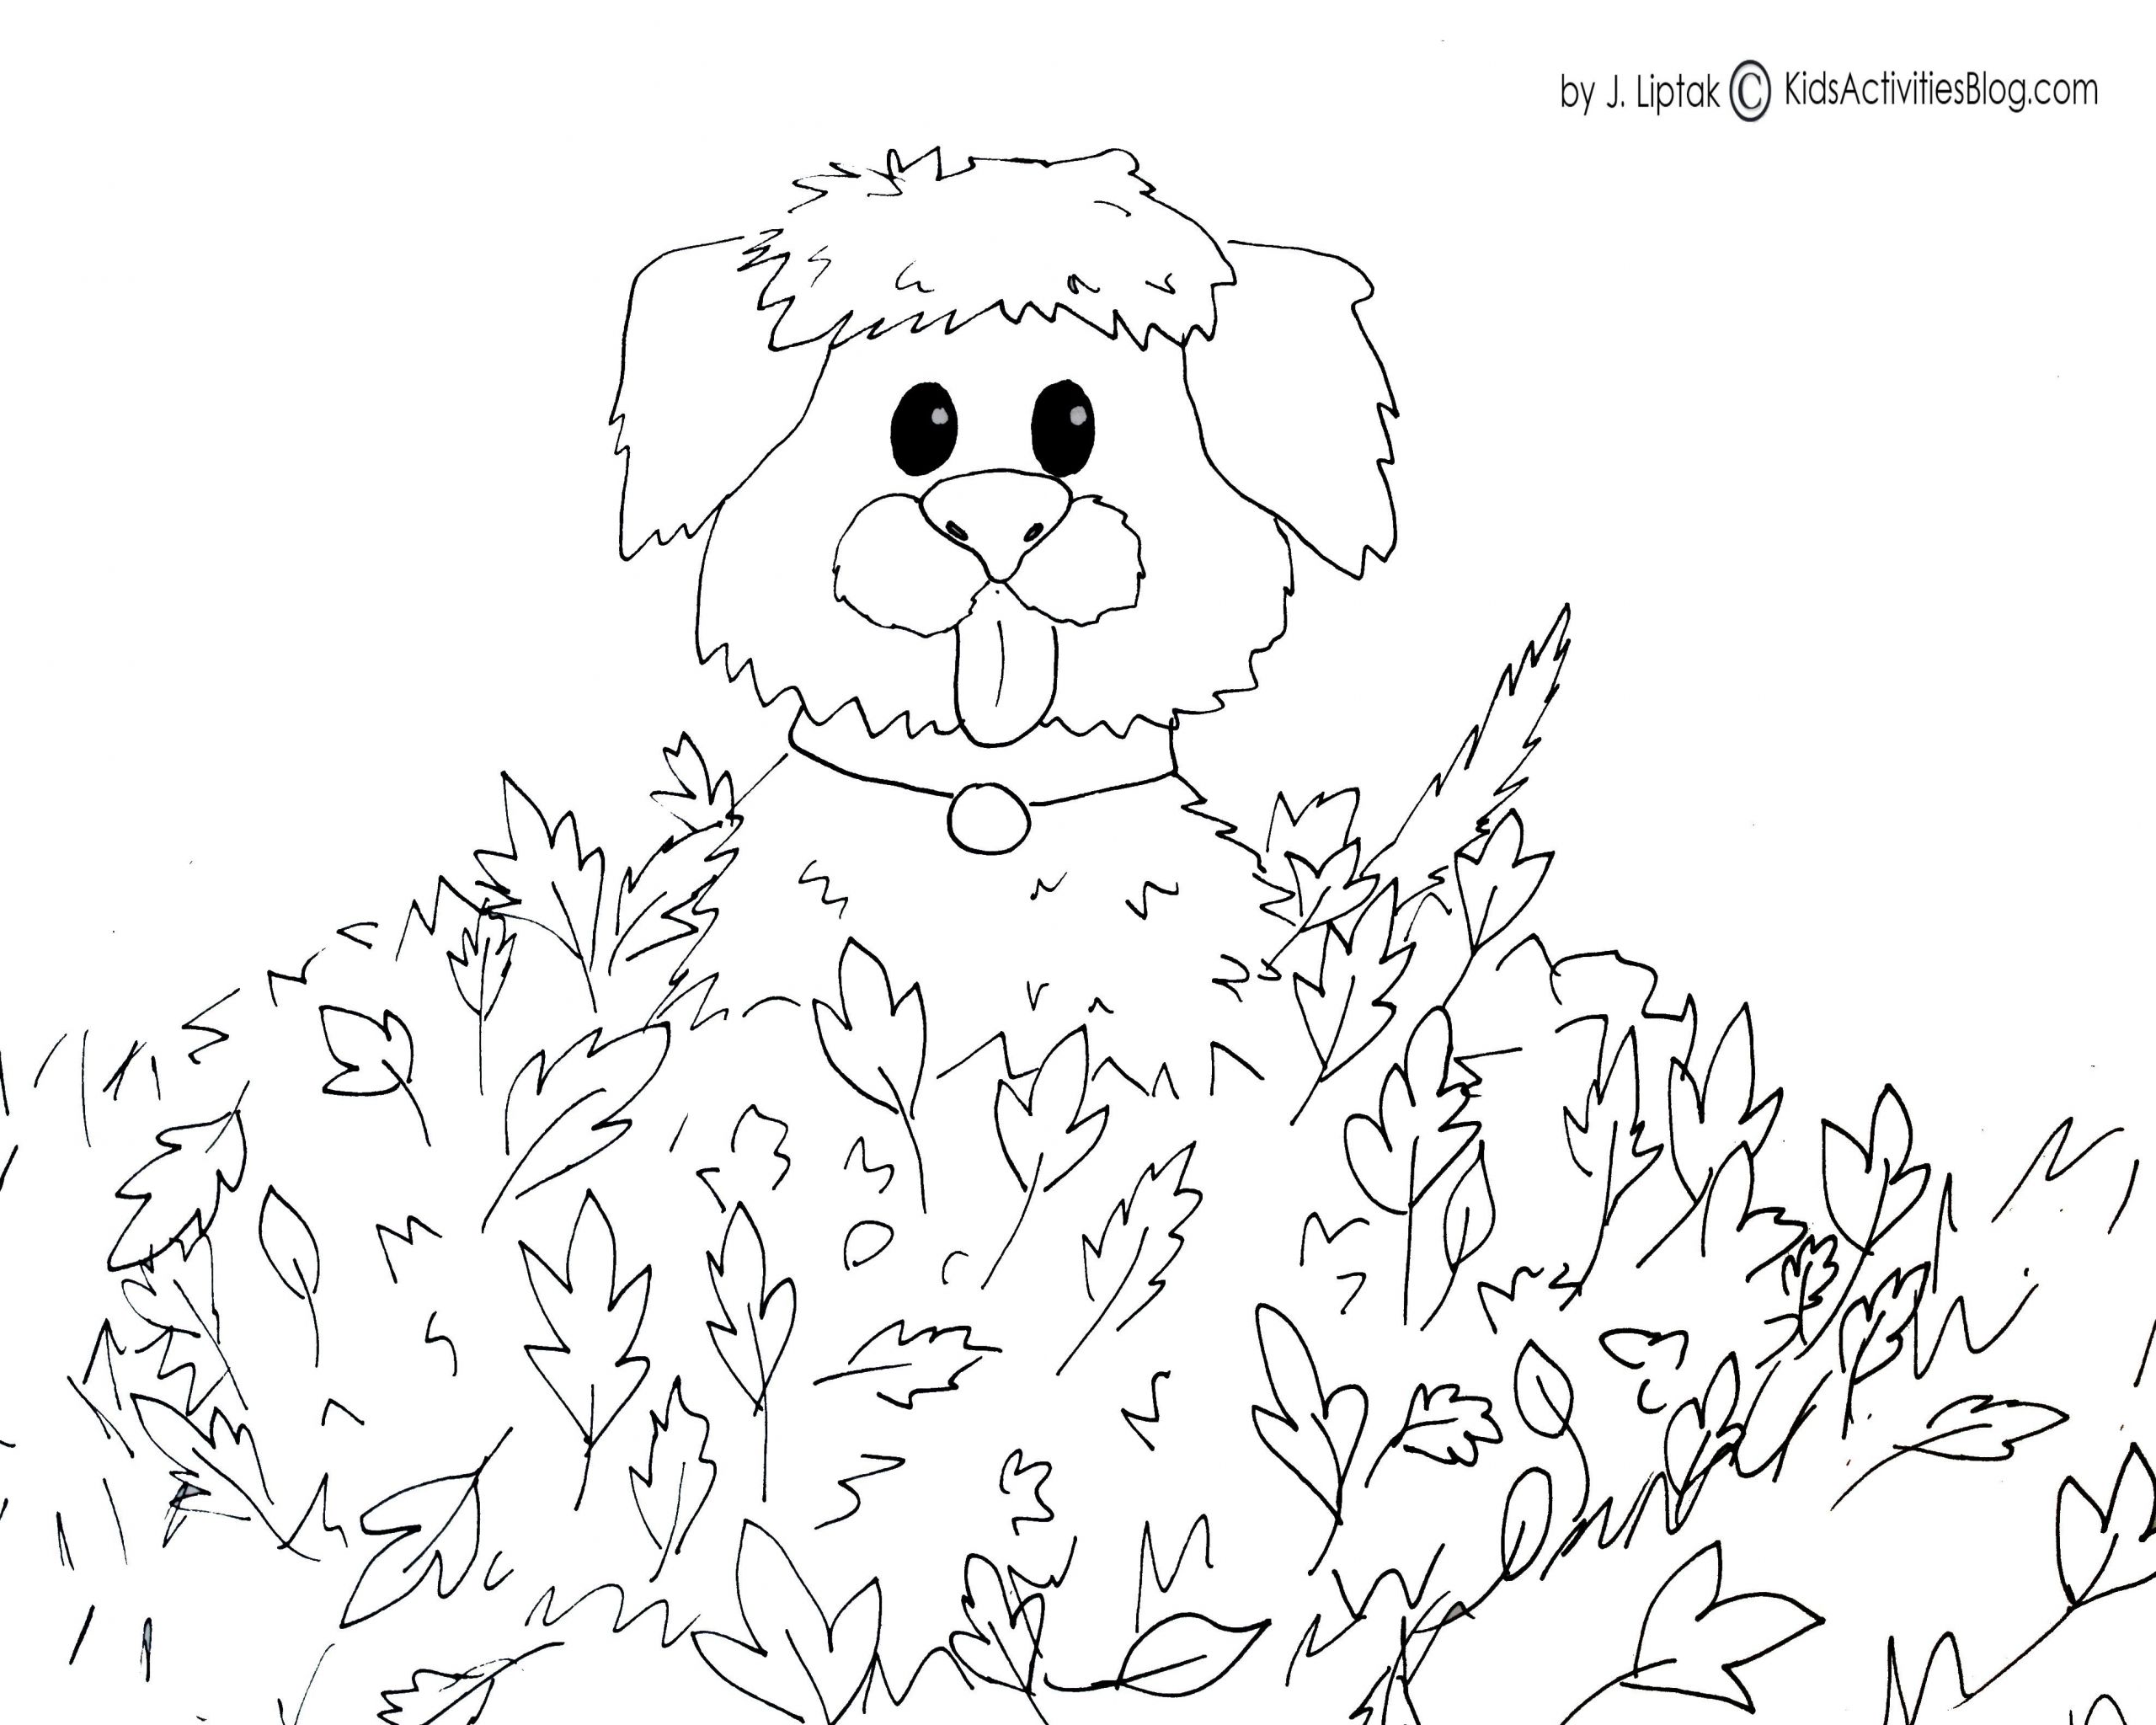 Kids Coloring Pages Fall
 4 FREE PRINTABLE FALL COLORING PAGES Kids Activities